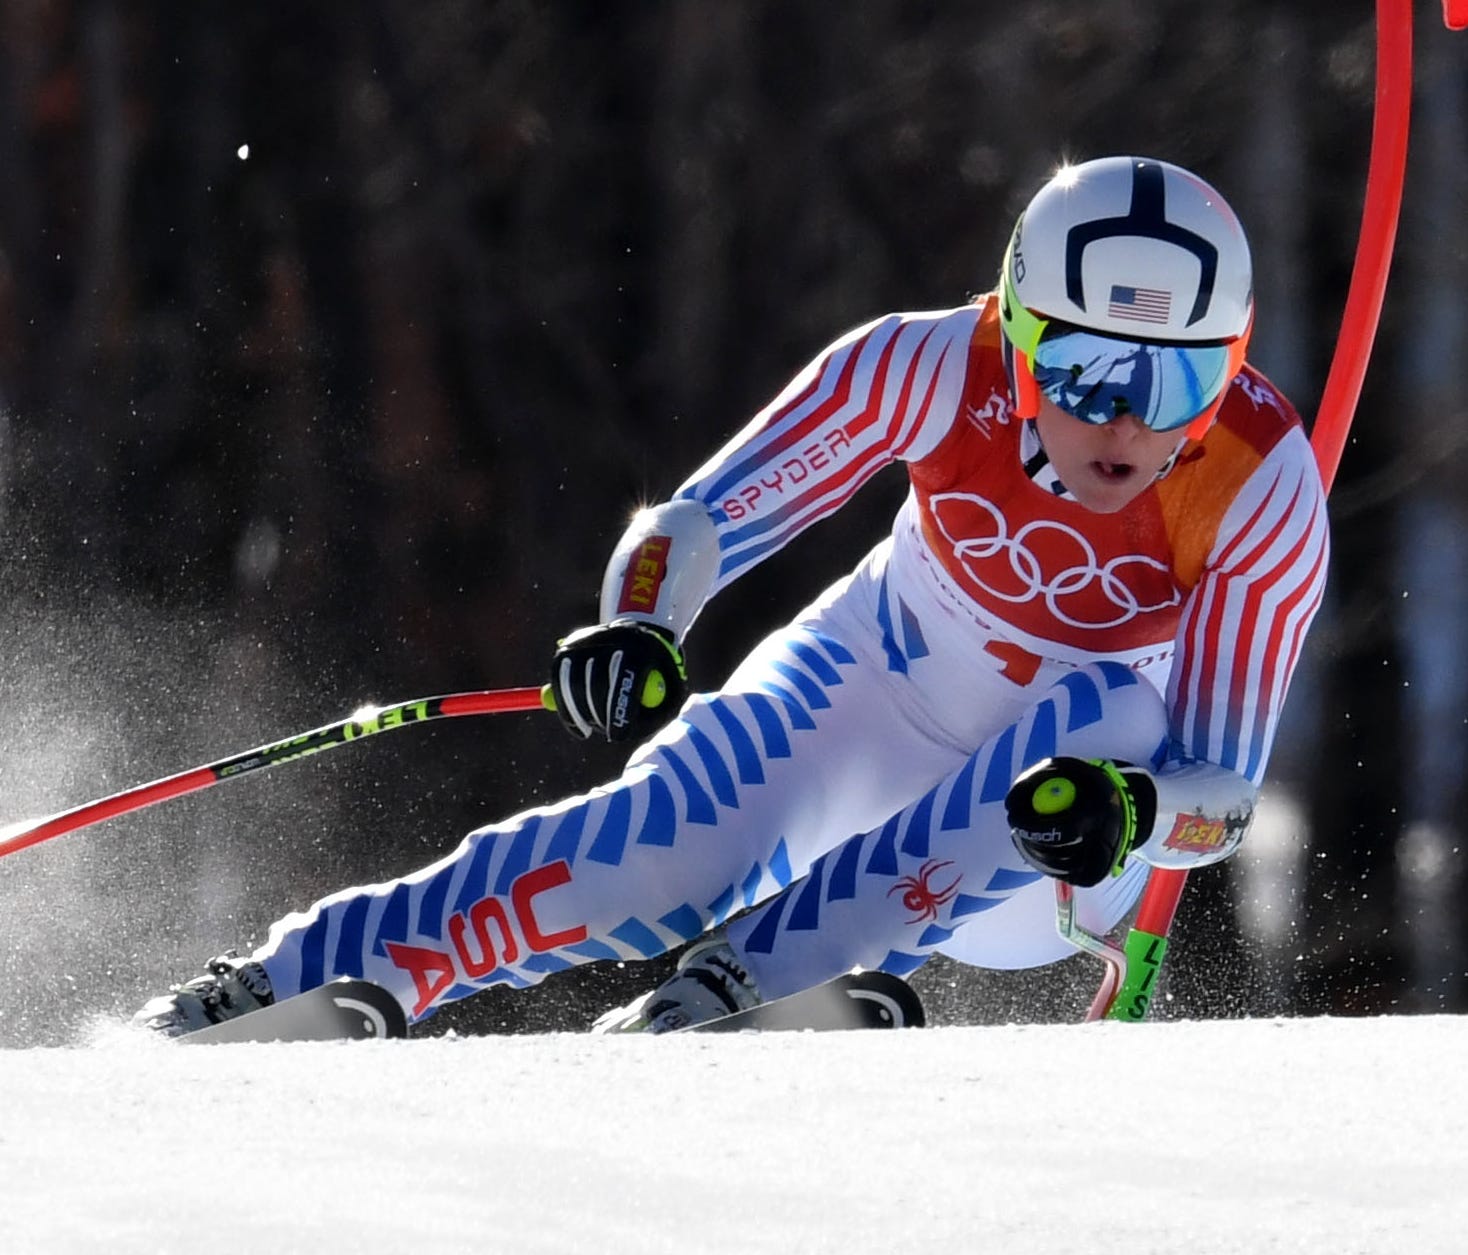 Lindsey Vonn is getting ready to take on the downhill event at the Winter Olympics.